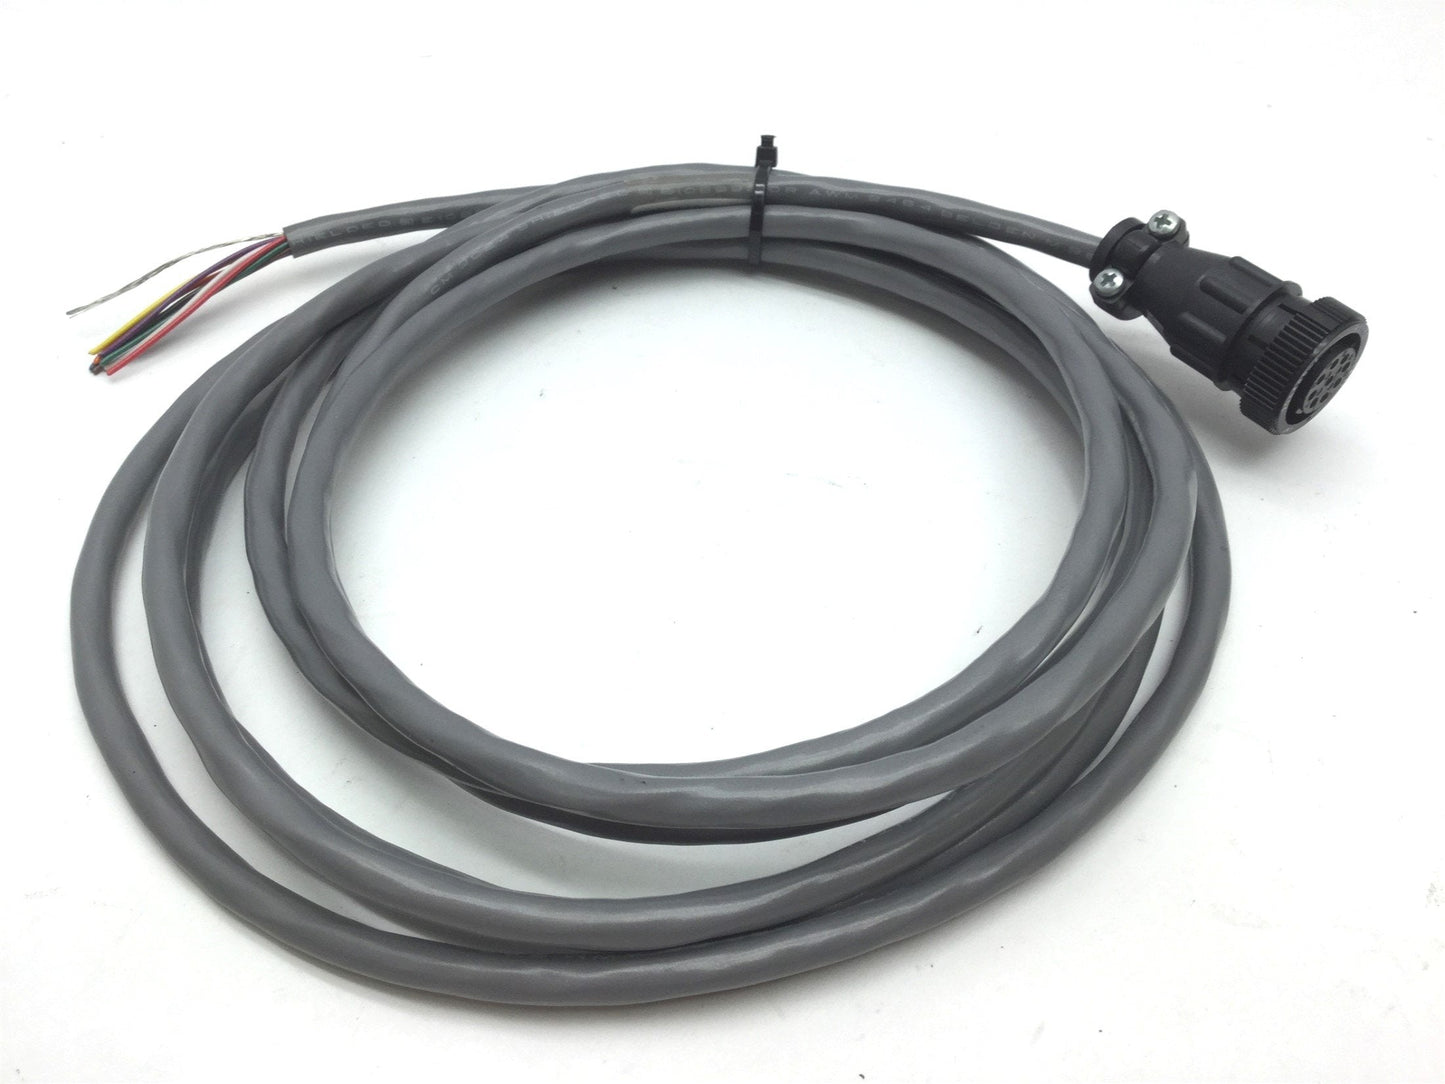 Used Parker Daedal B 006-1102-10 Limit & Home Switch Linear Actuator Cable, 10'